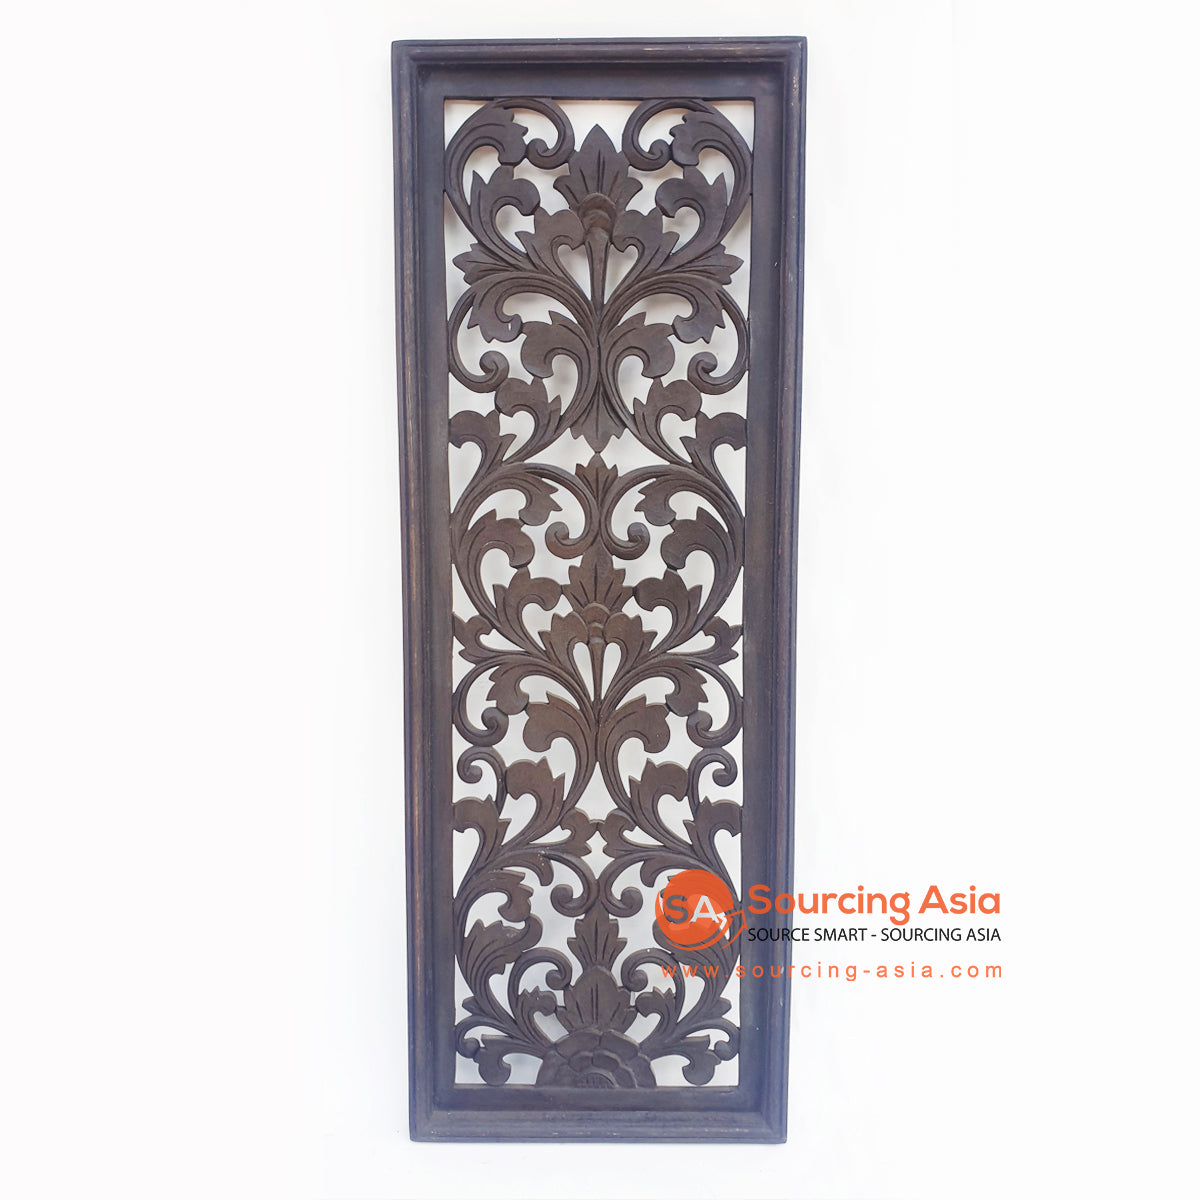 LUHC033-1 DARK BROWN WOODEN RECTANGLE FLOWER CARVED PANEL